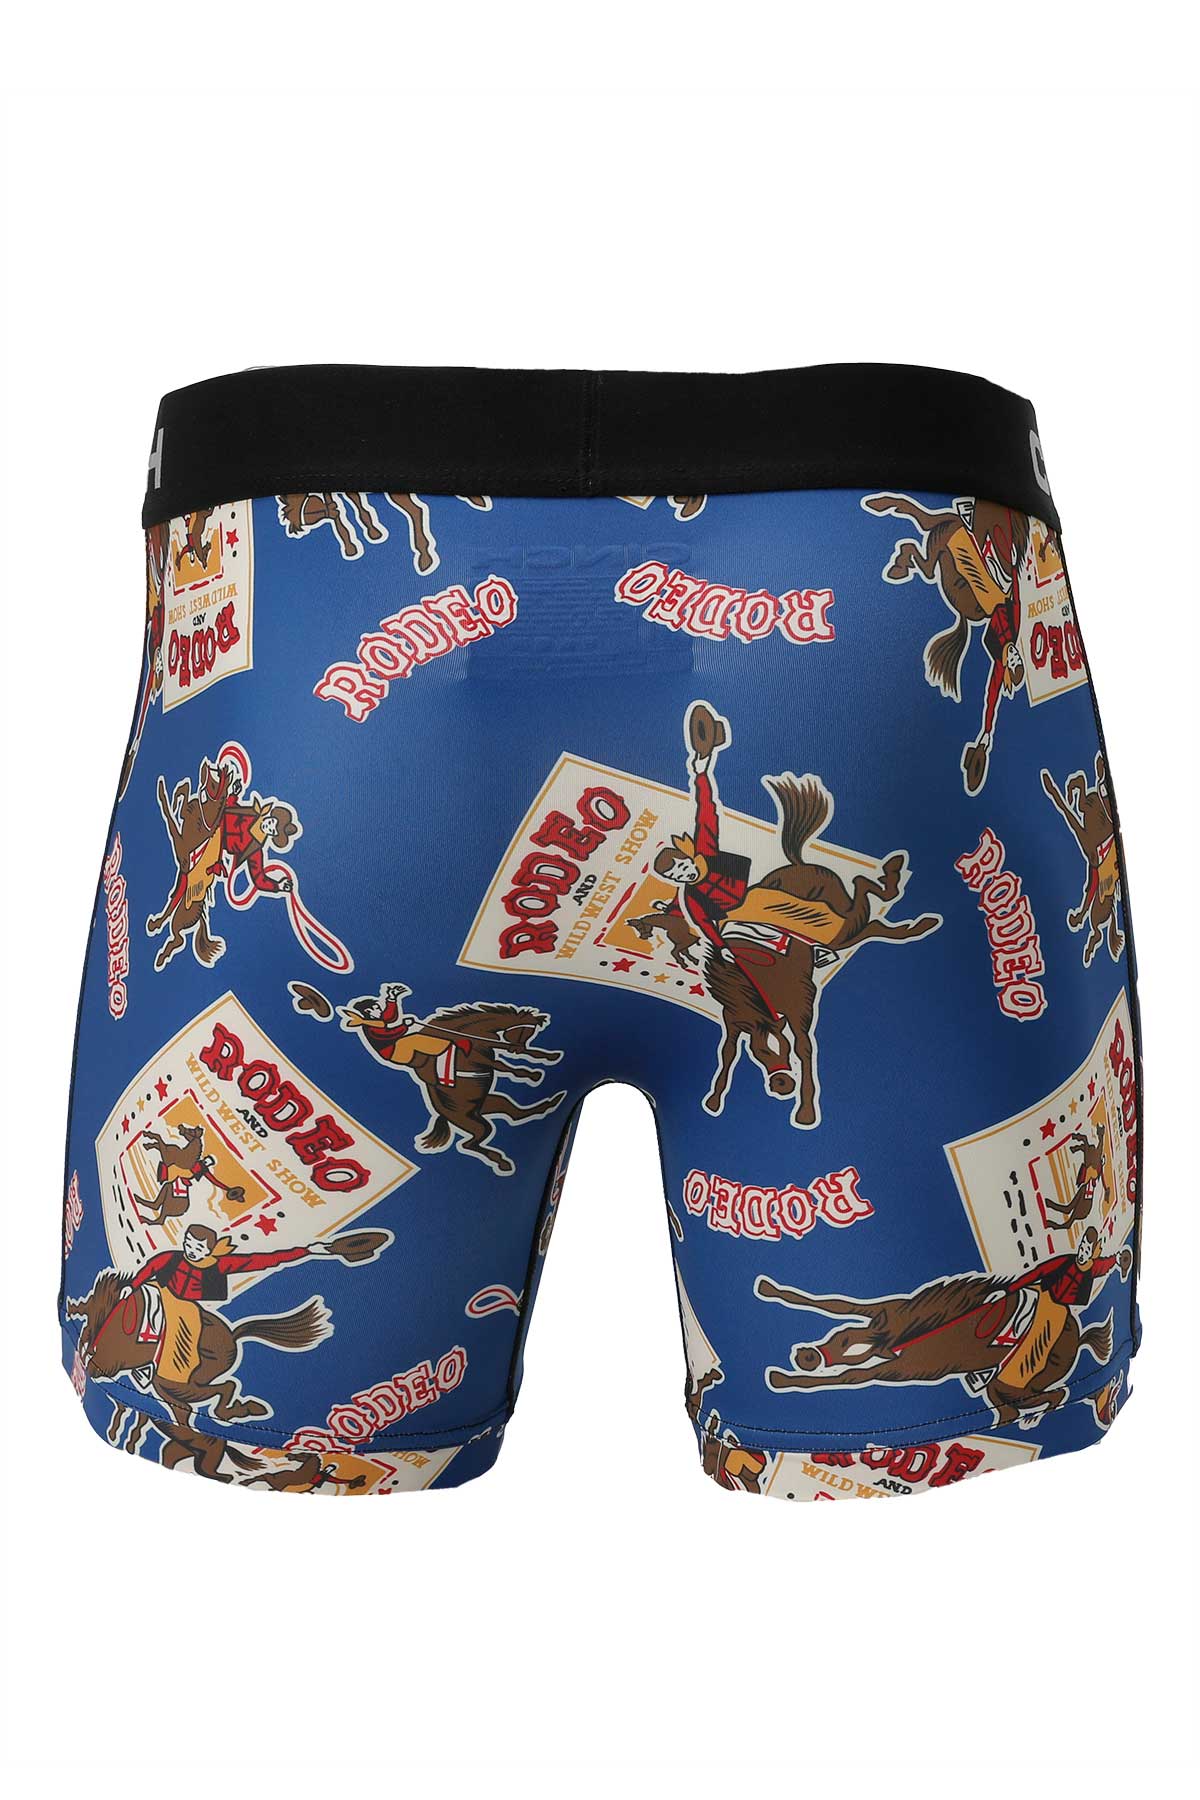 Cinch 6” Mens Rodeo Underwear – The Tack House